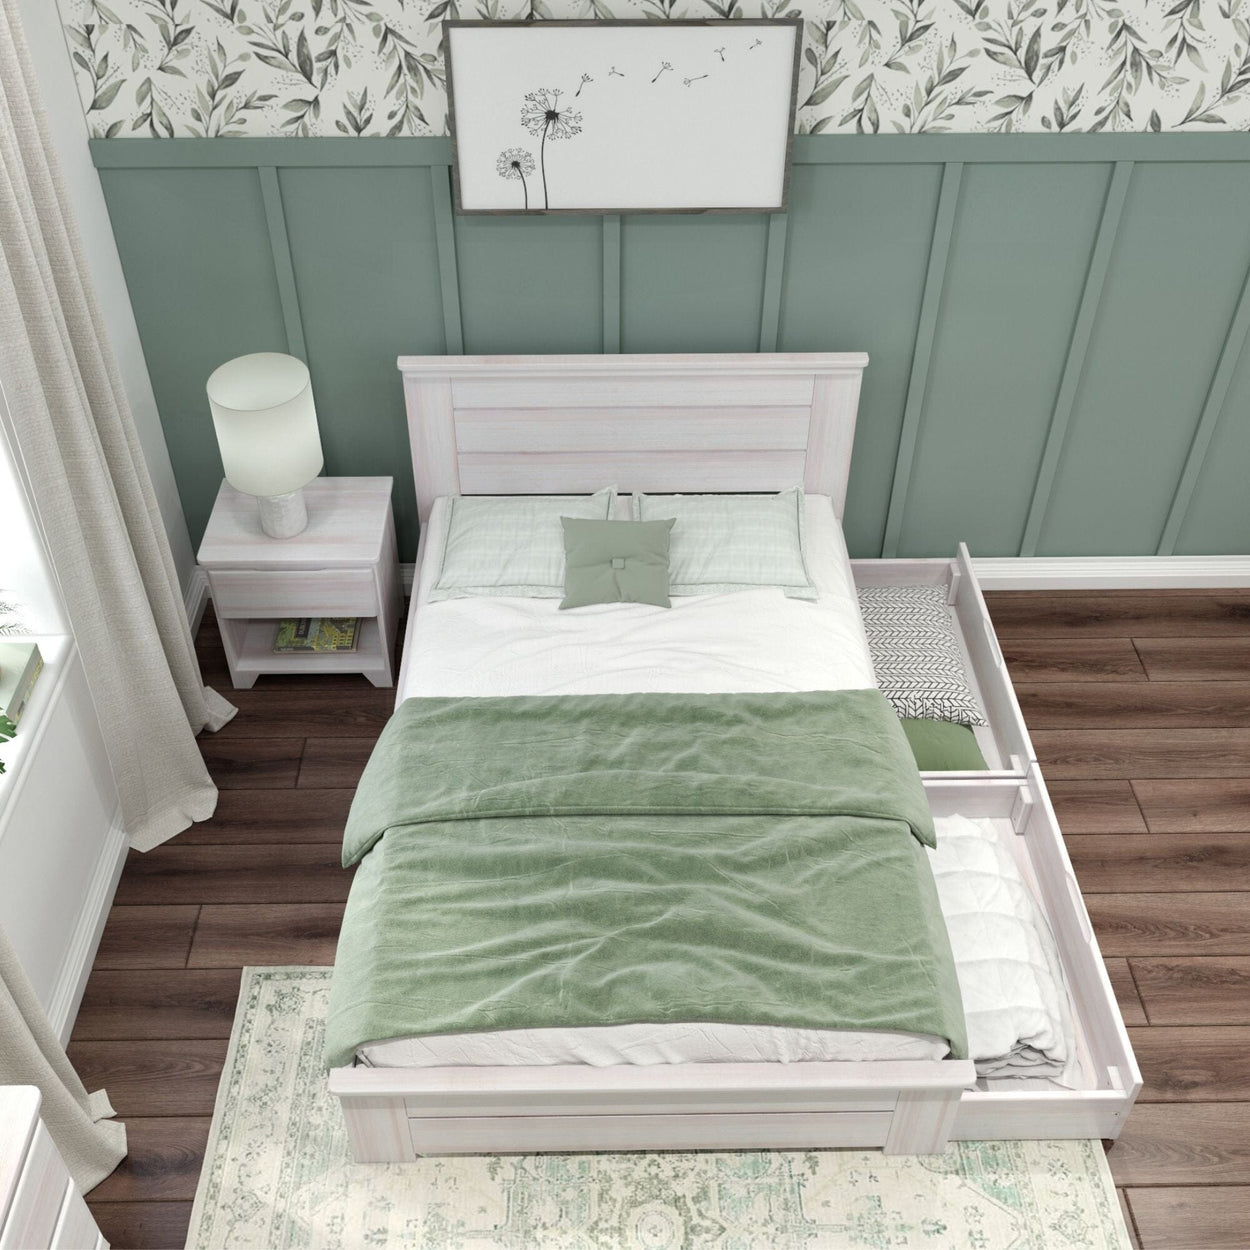 197221-182 : Kids Beds Farmhouse Full Bed with Panel Headboard with Storage Drawers, White Wash